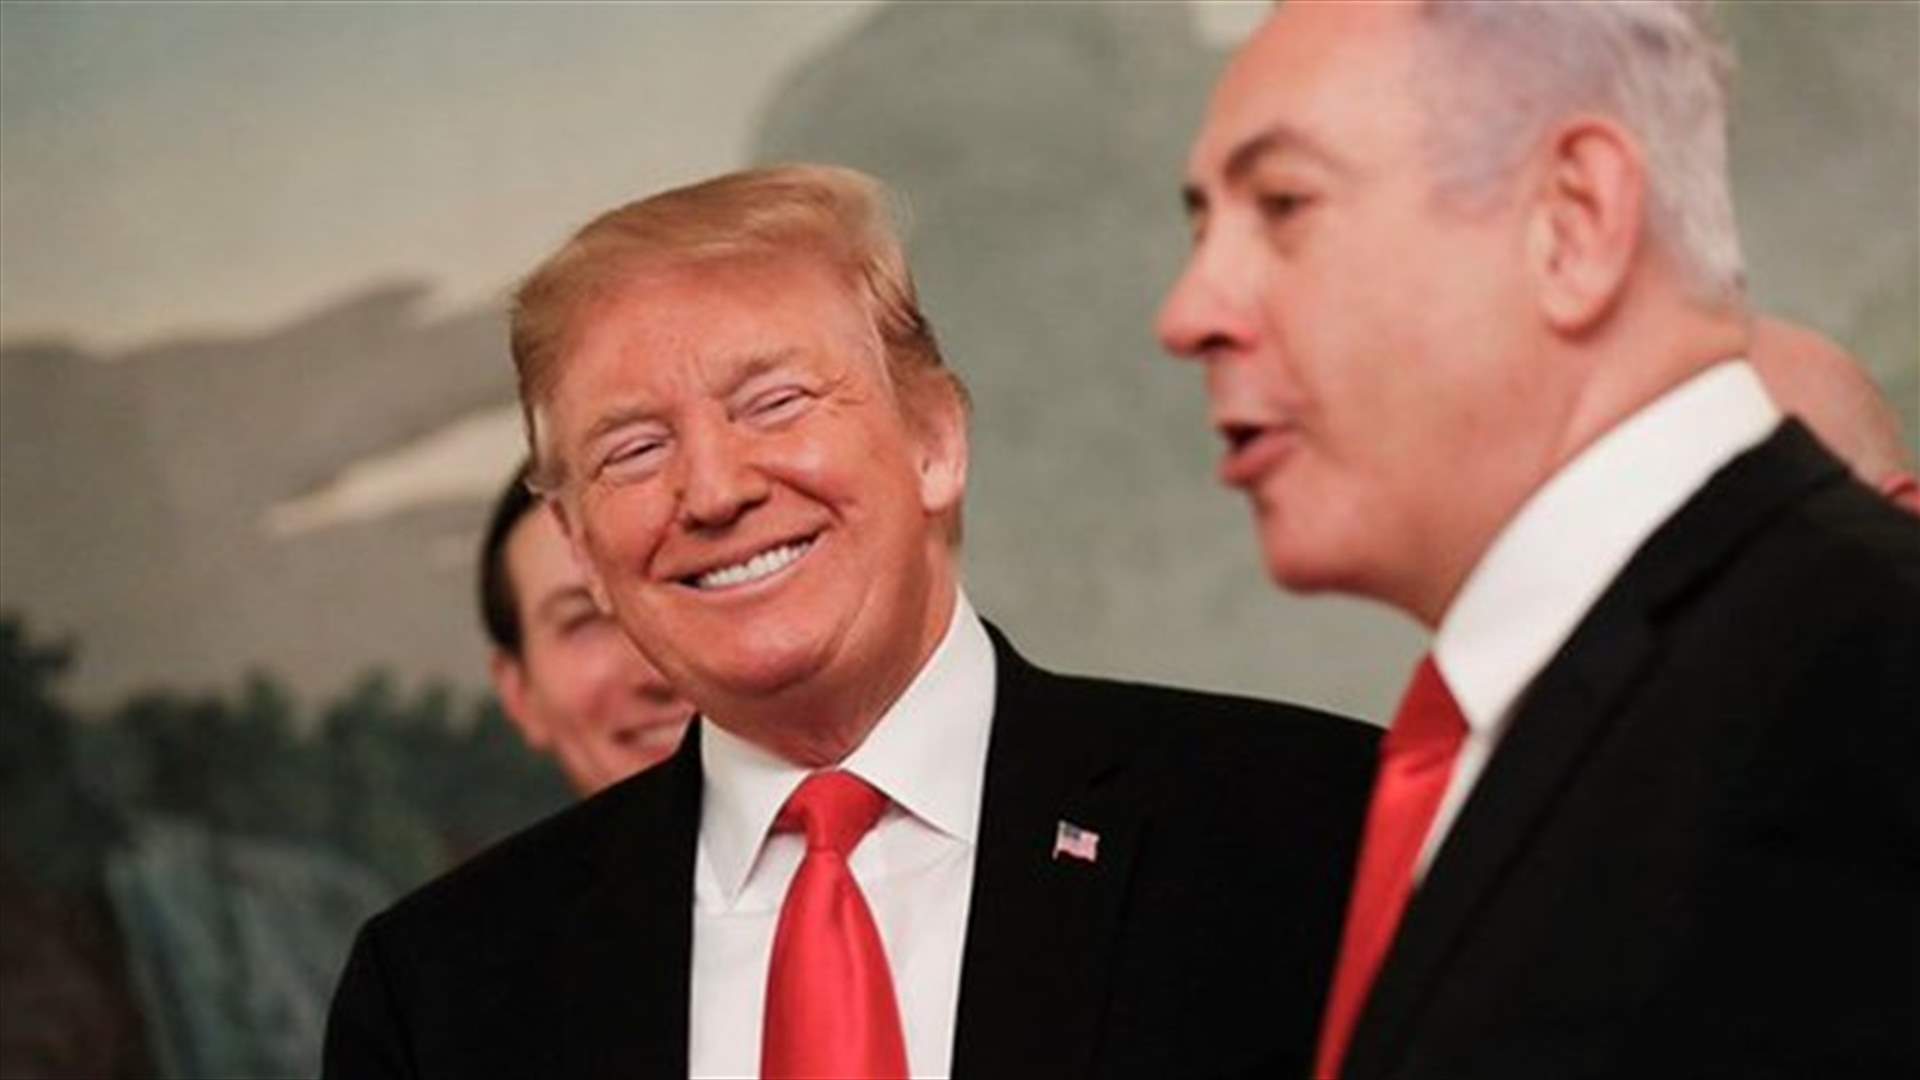 In boost for Netanyahu, Trump signs proclamation recognizing Golan Heights as Israeli territory